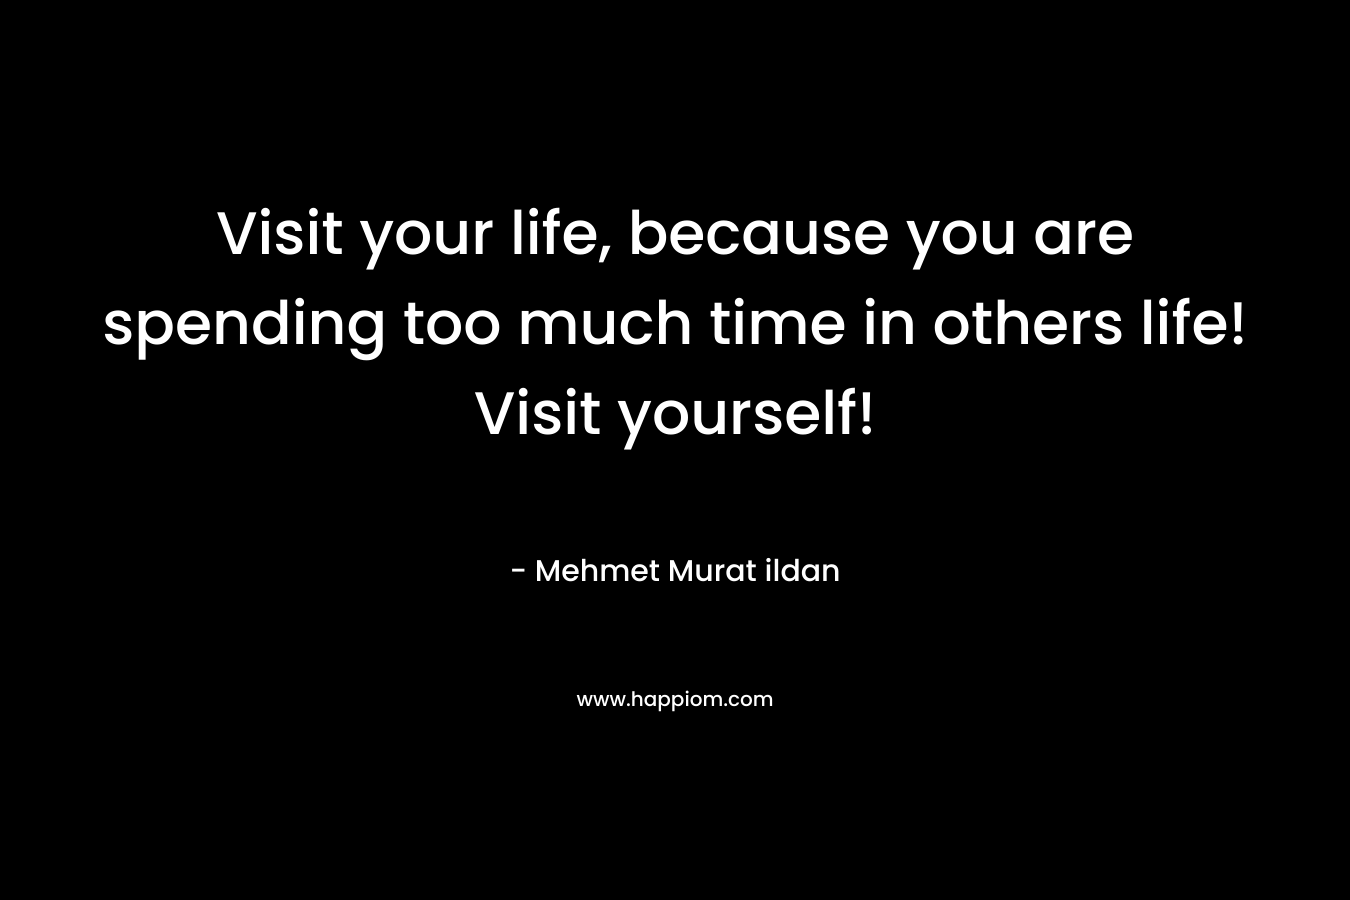 Visit your life, because you are spending too much time in others life! Visit yourself! – Mehmet Murat ildan